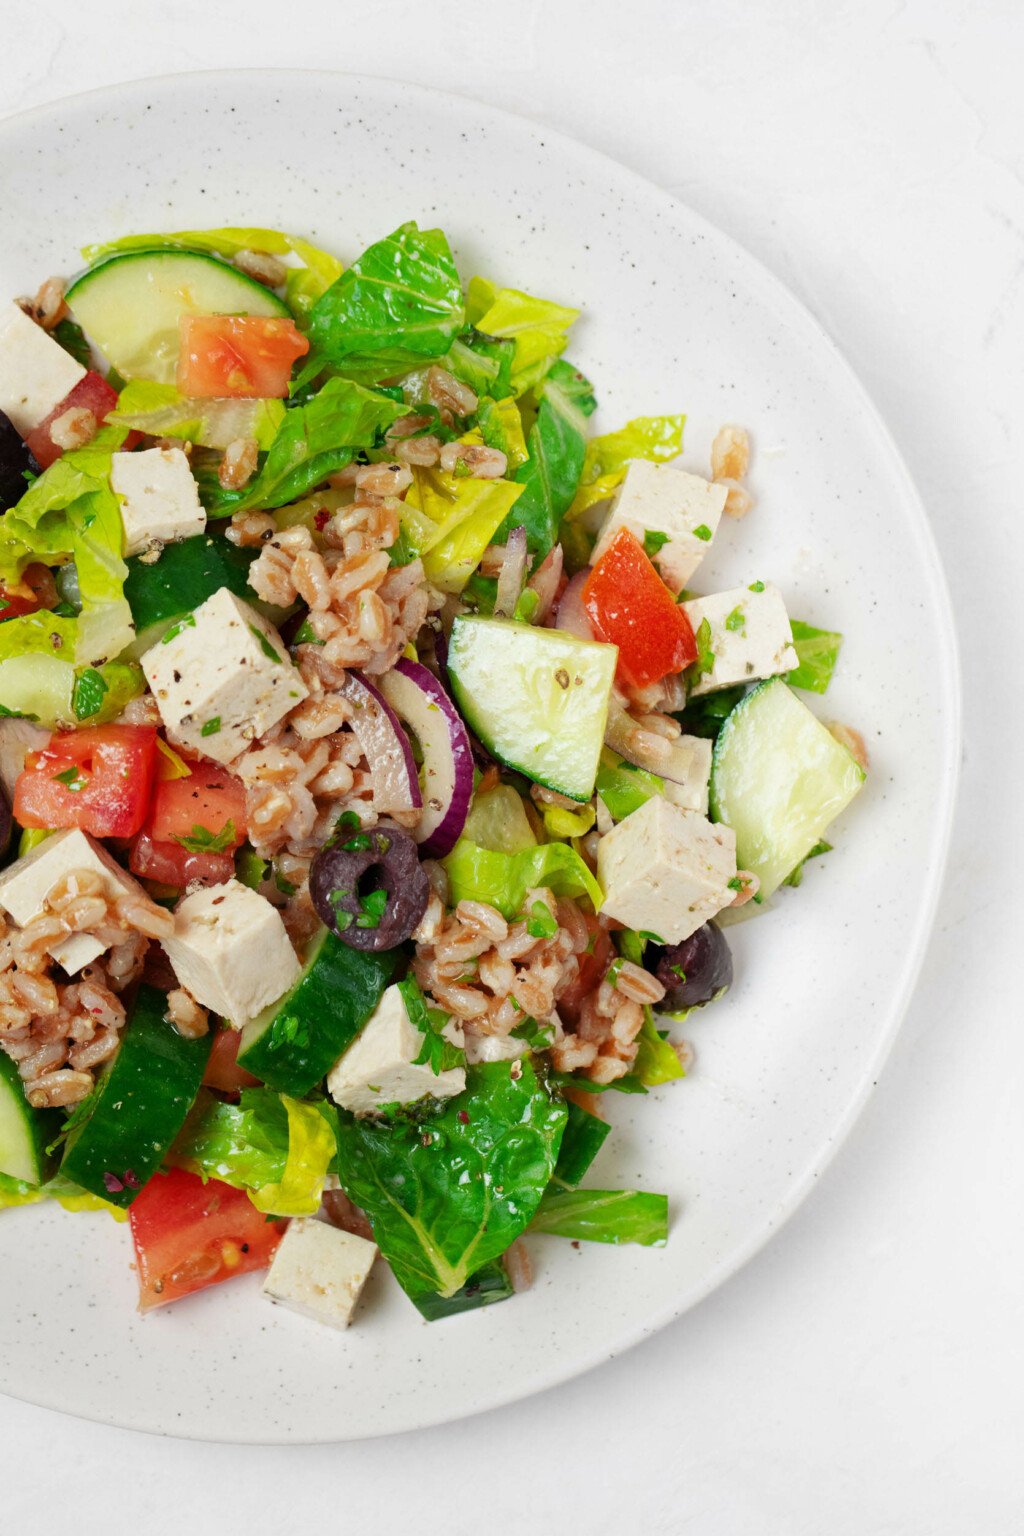 An overhead image of a Greek salad made with plant-based ingredients and cooked pearled barley. The salad rests on a round white plate.